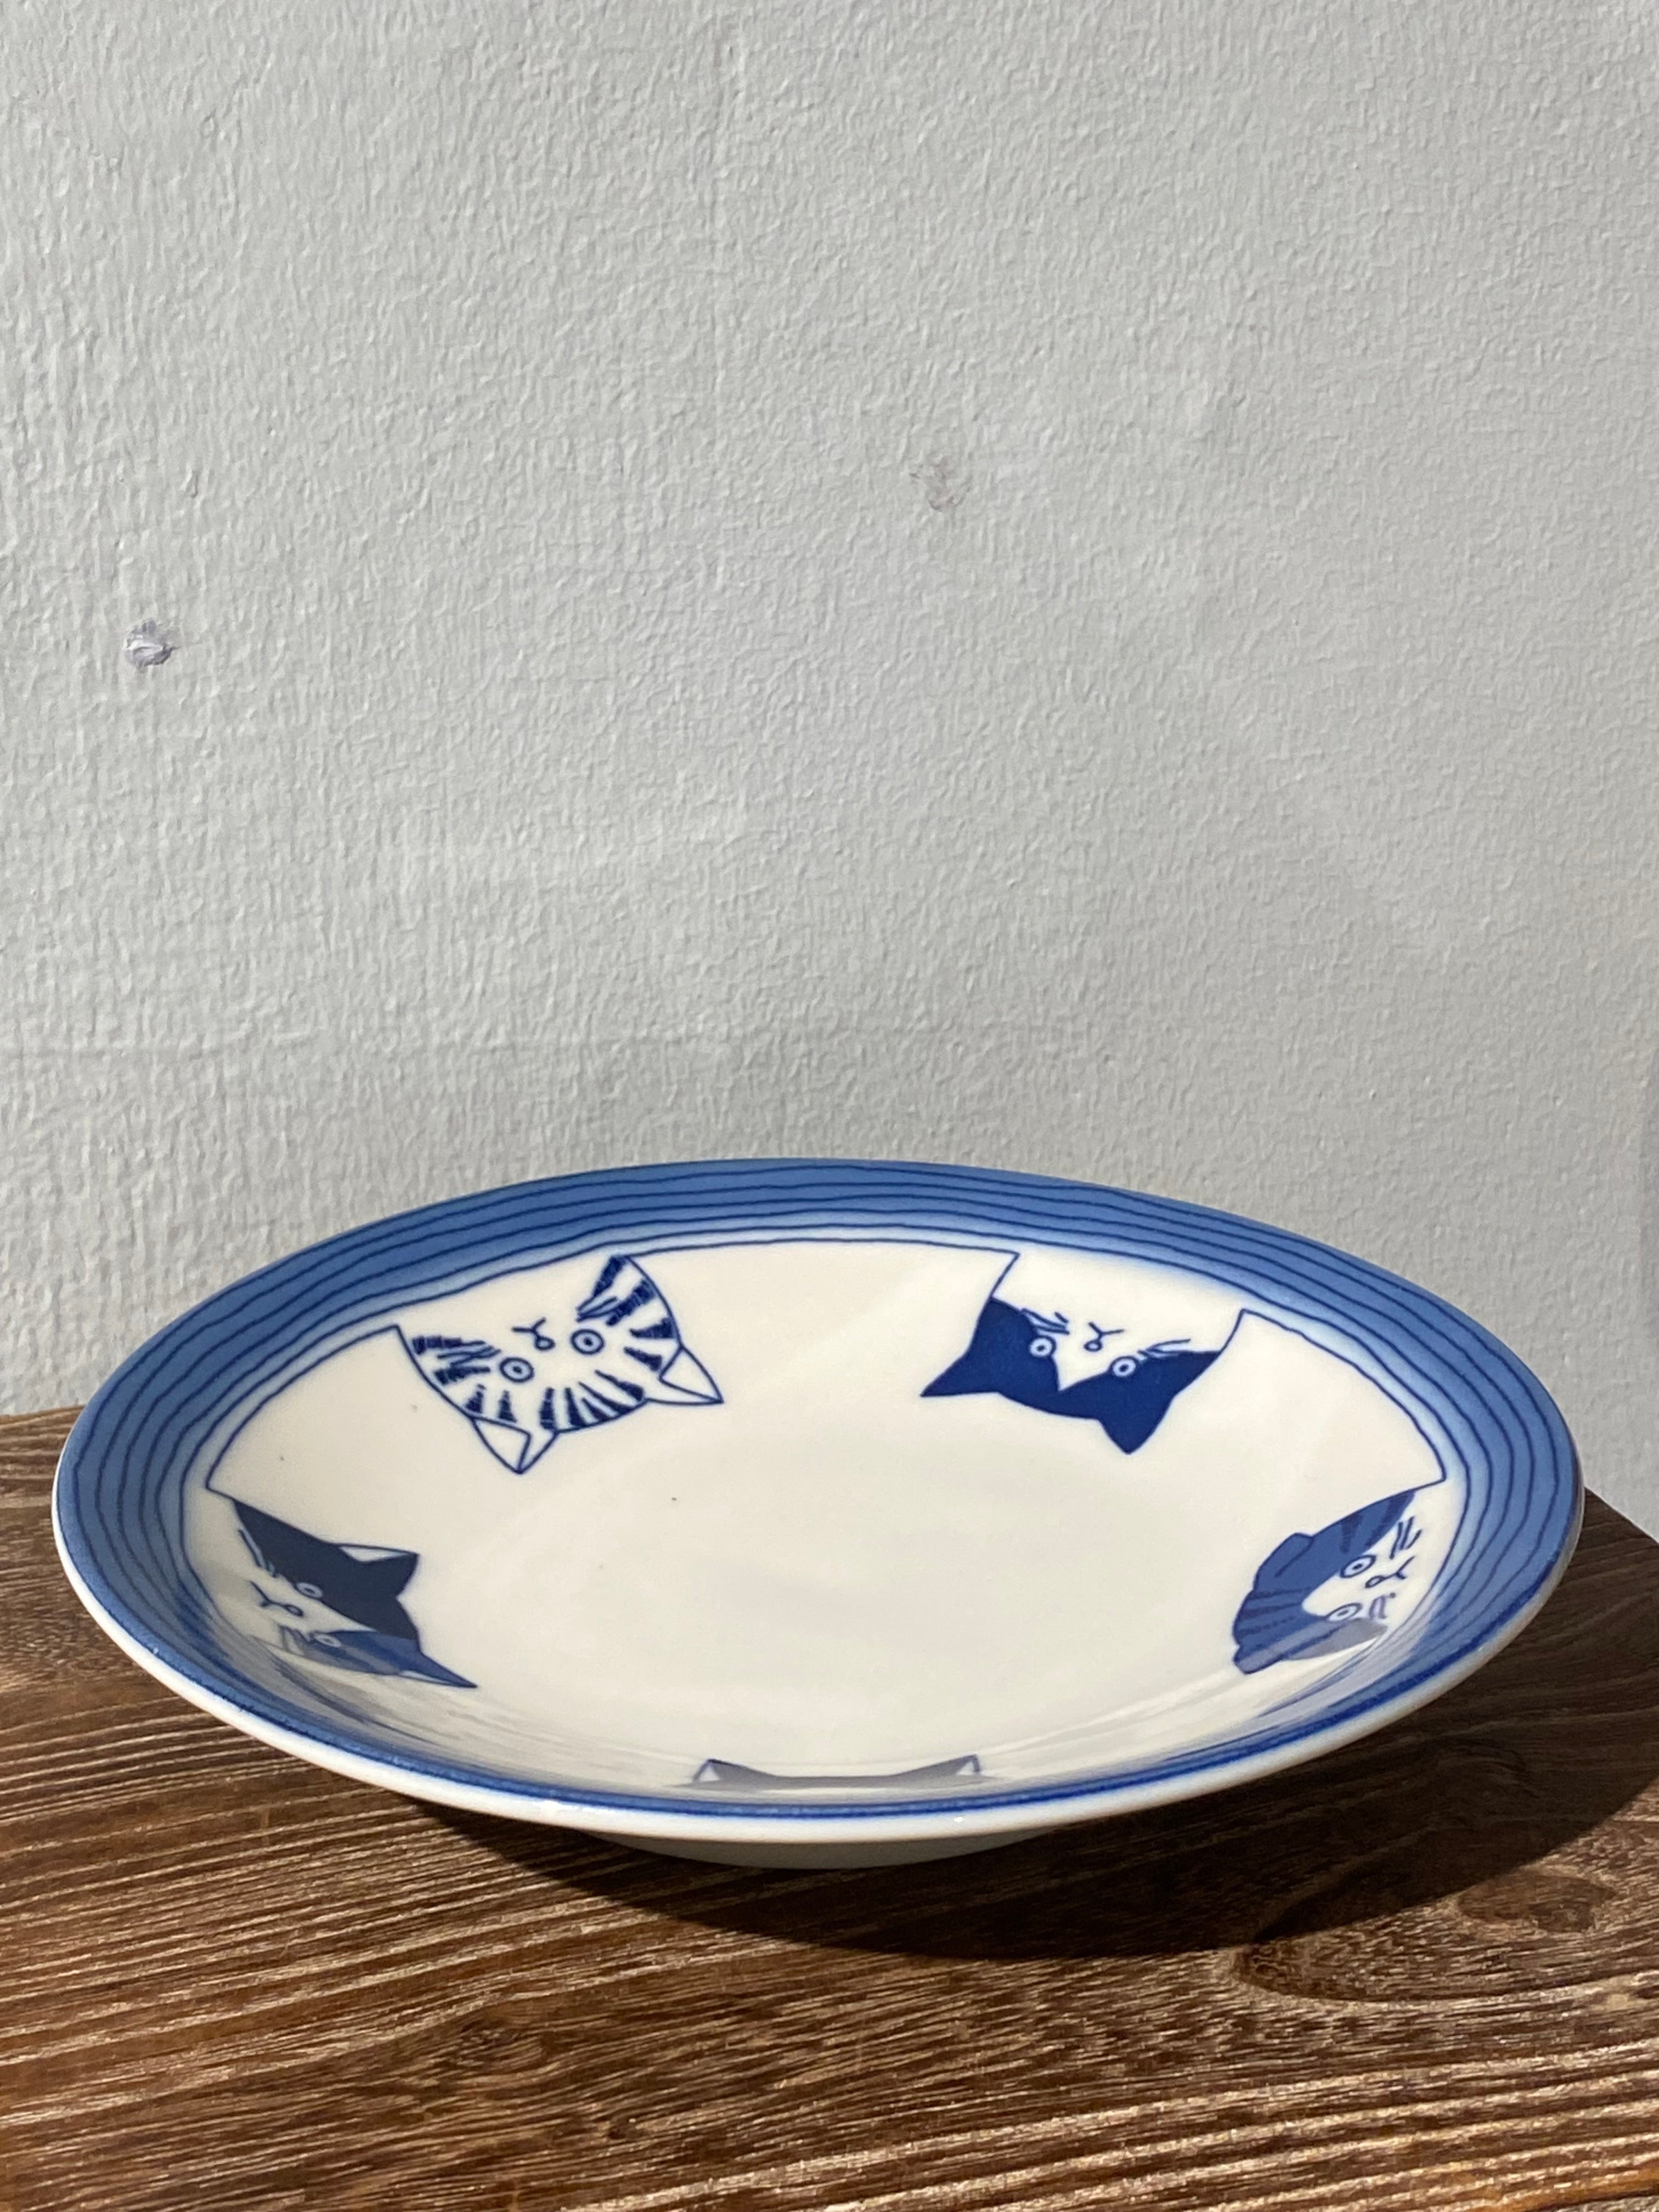 Cat plate with five cats.